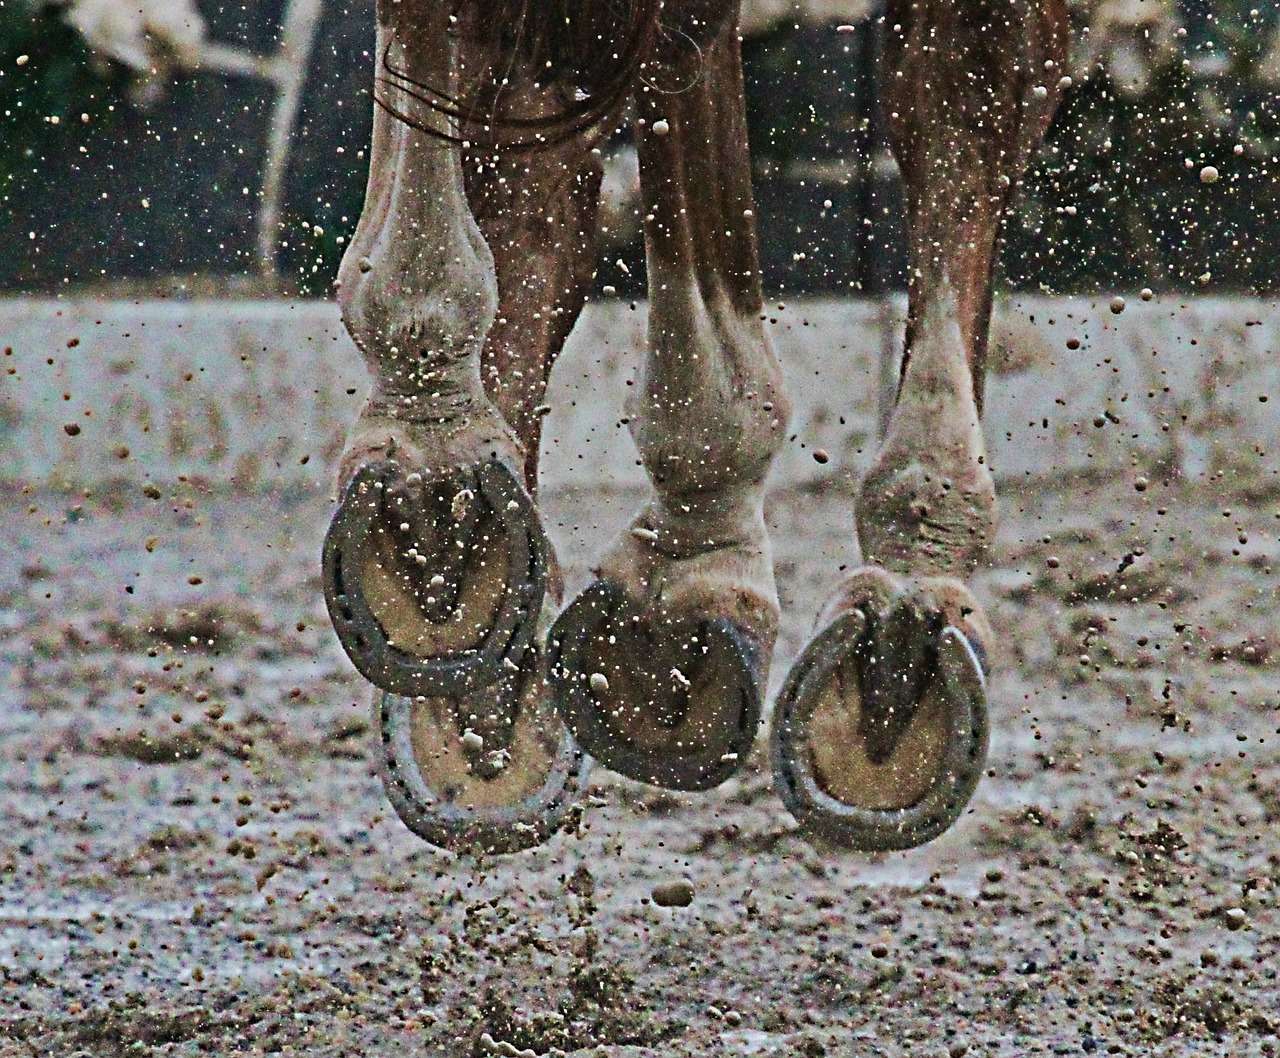 Horses enjoy galloping around in muddy conditions.